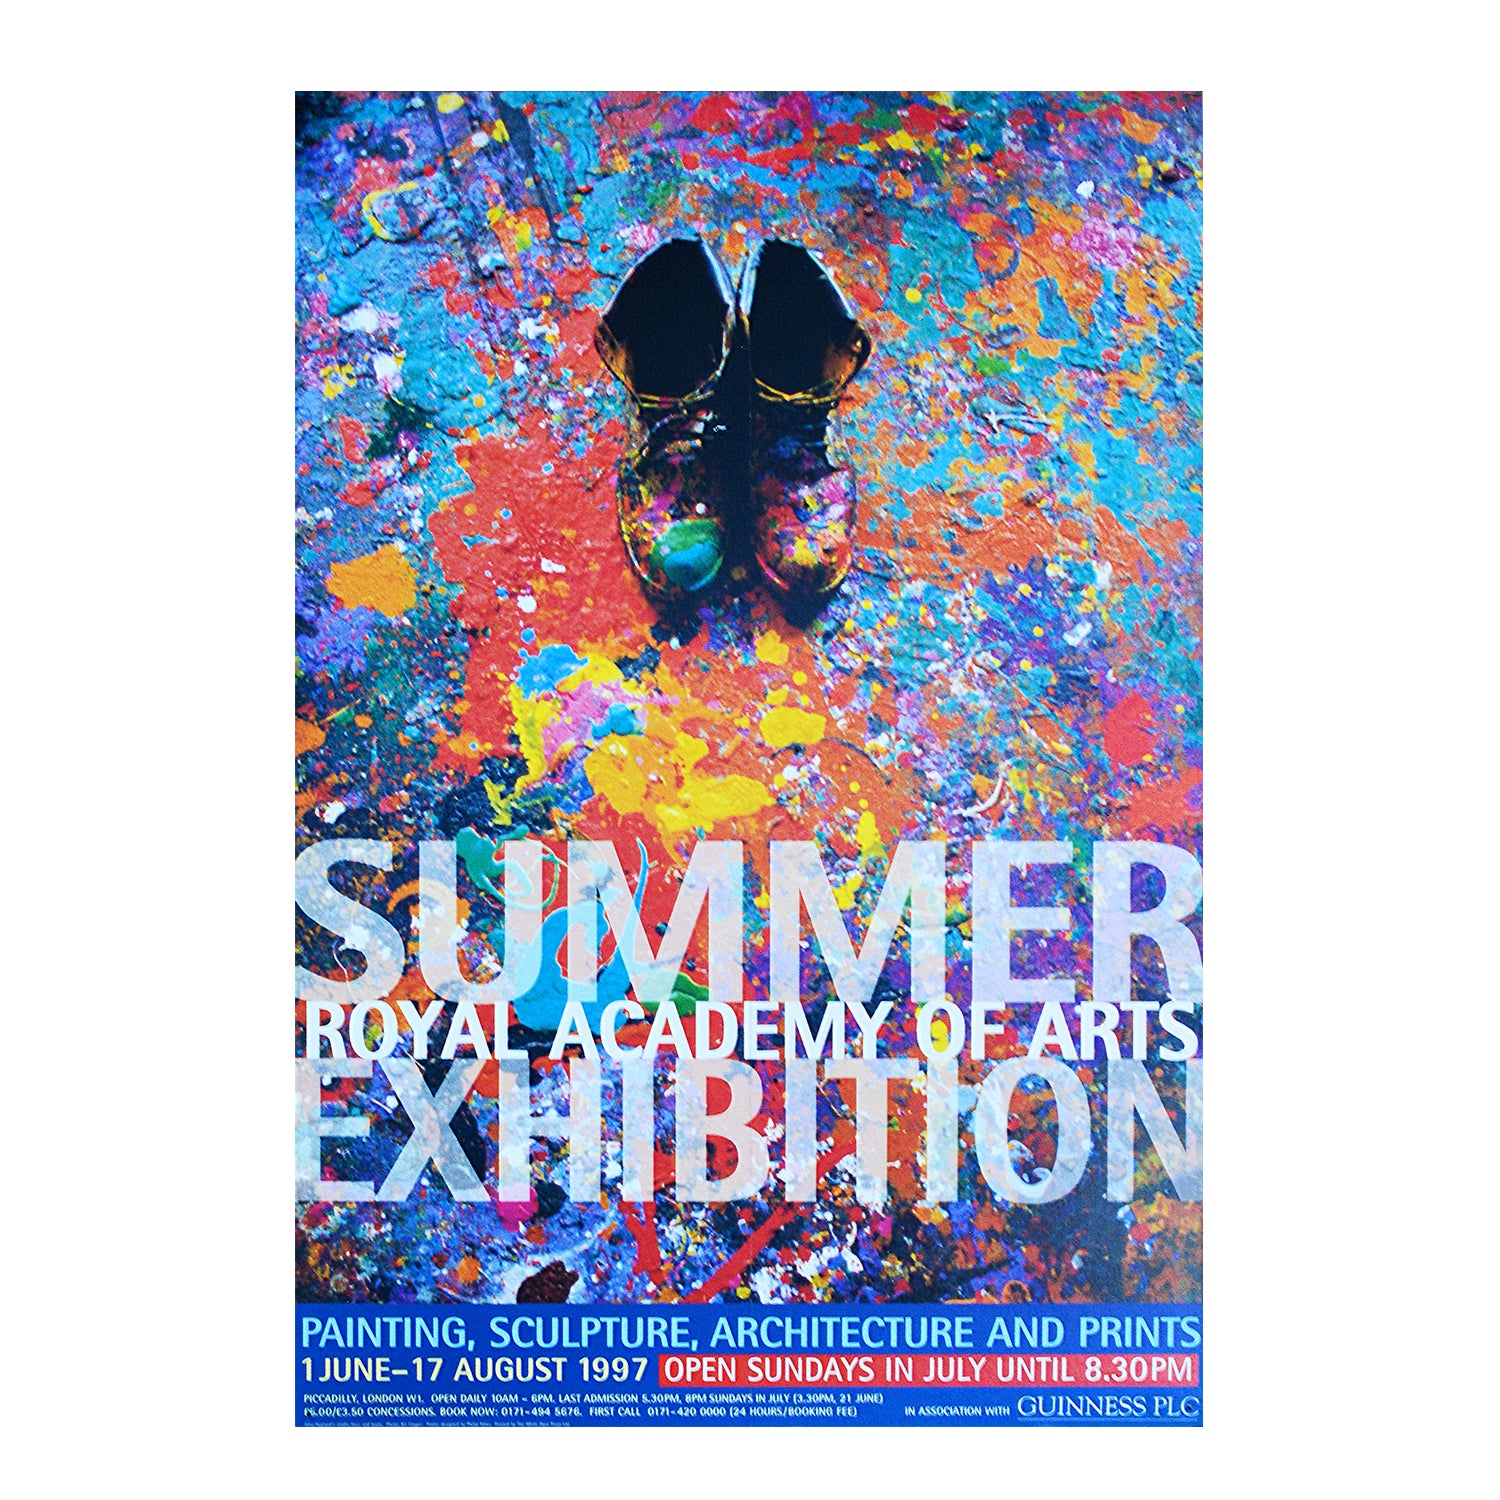 original poster, for the Royal Academy Summer Exhibition in 1997 featuring a photograph of the artist John Hoyland's studio floor and paint splattered boots